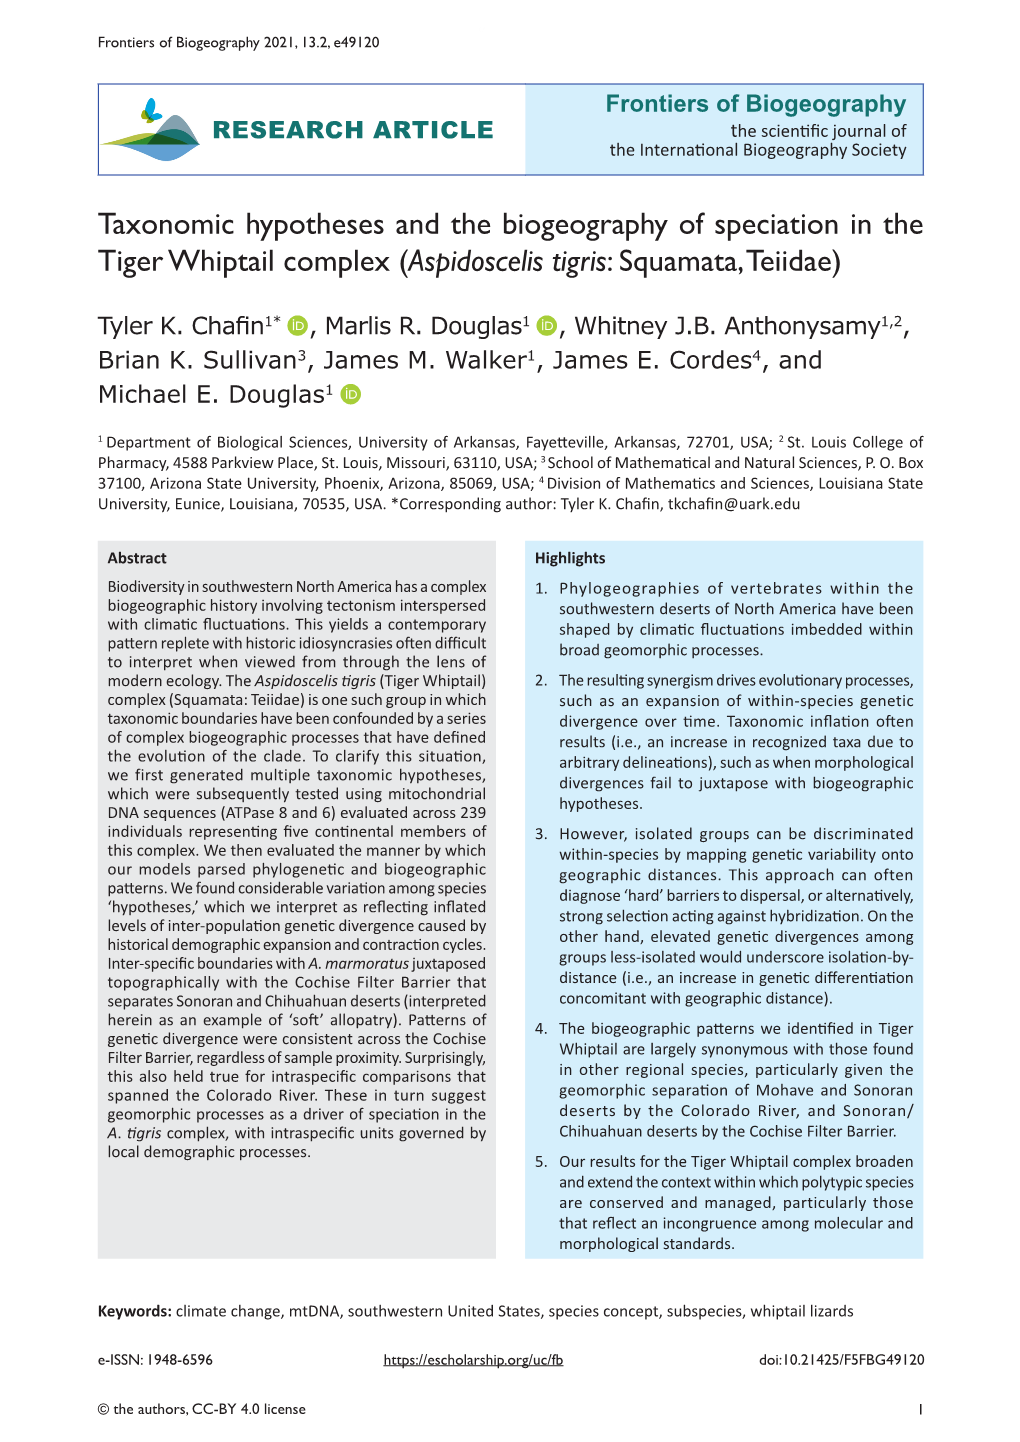 Taxonomic Hypotheses and the Biogeography of Speciation in the Tiger Whiptail Complex (Aspidoscelis Tigris: Squamata, Teiidae)